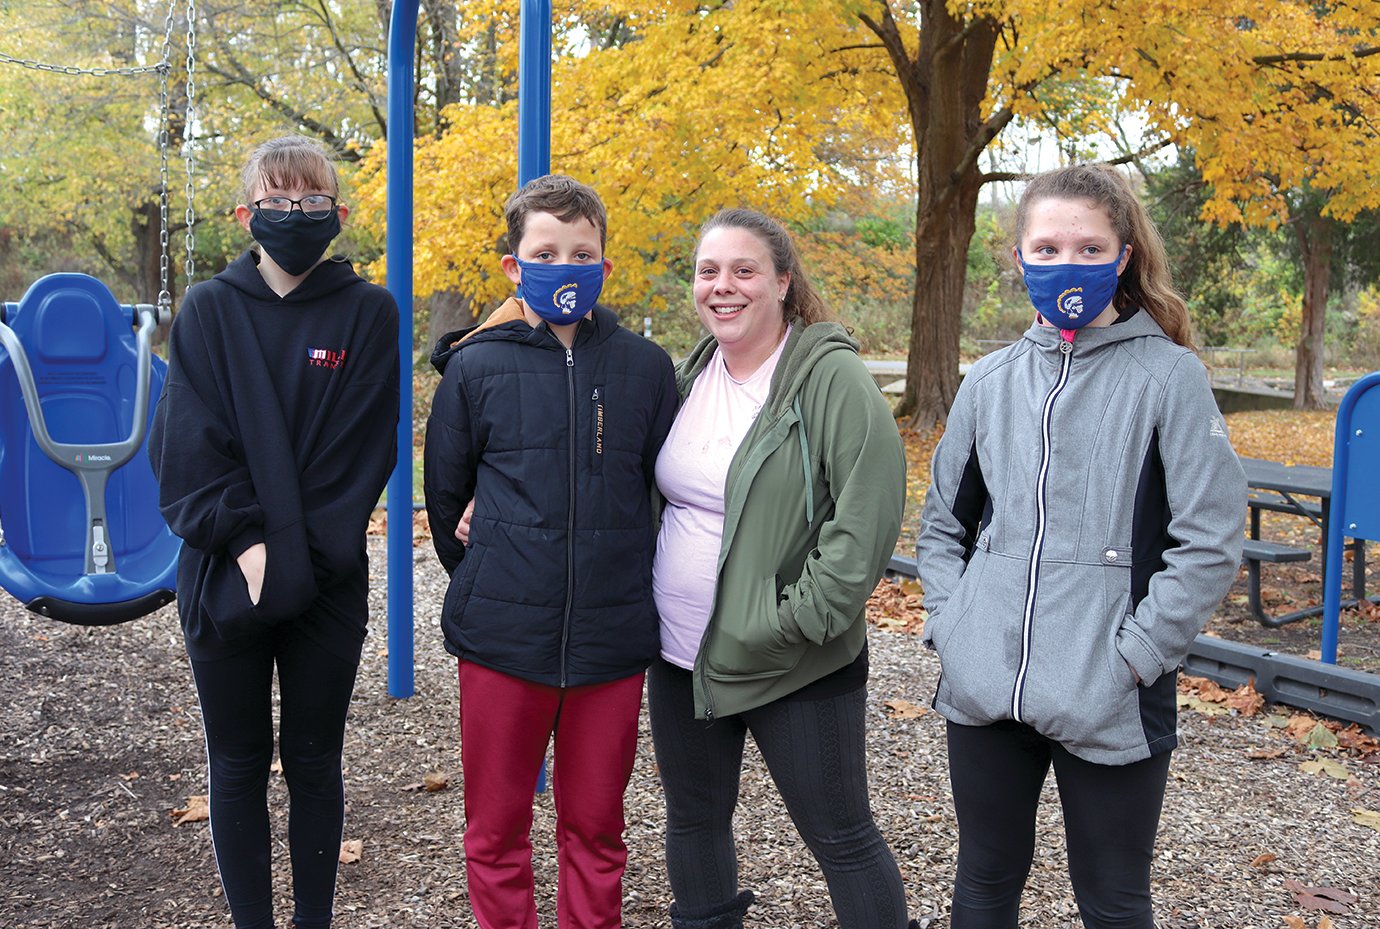 Members of the Mantesta family, including Olivia, from left, Gavin, Kristen and Alyssa defy chilly temperatures by socially distancing themselves outdside Wednesday at Milligan Park.